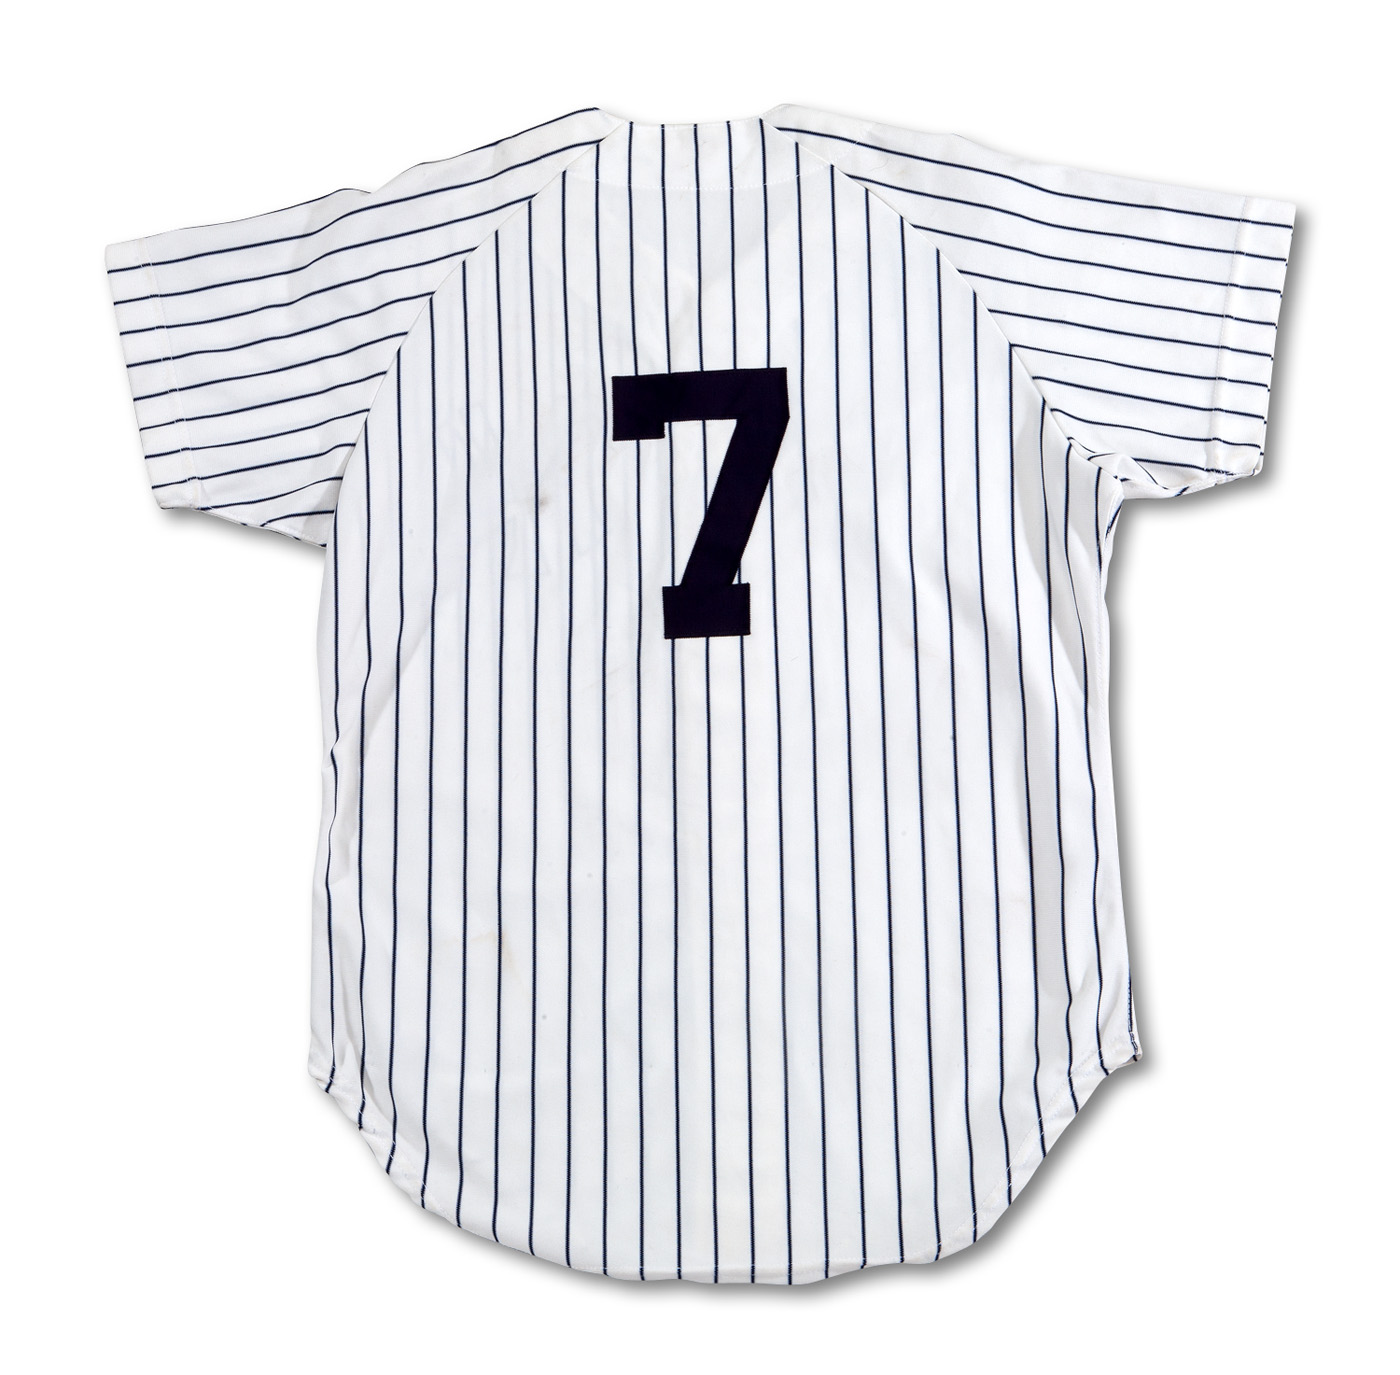 mickey mantle game used jersey